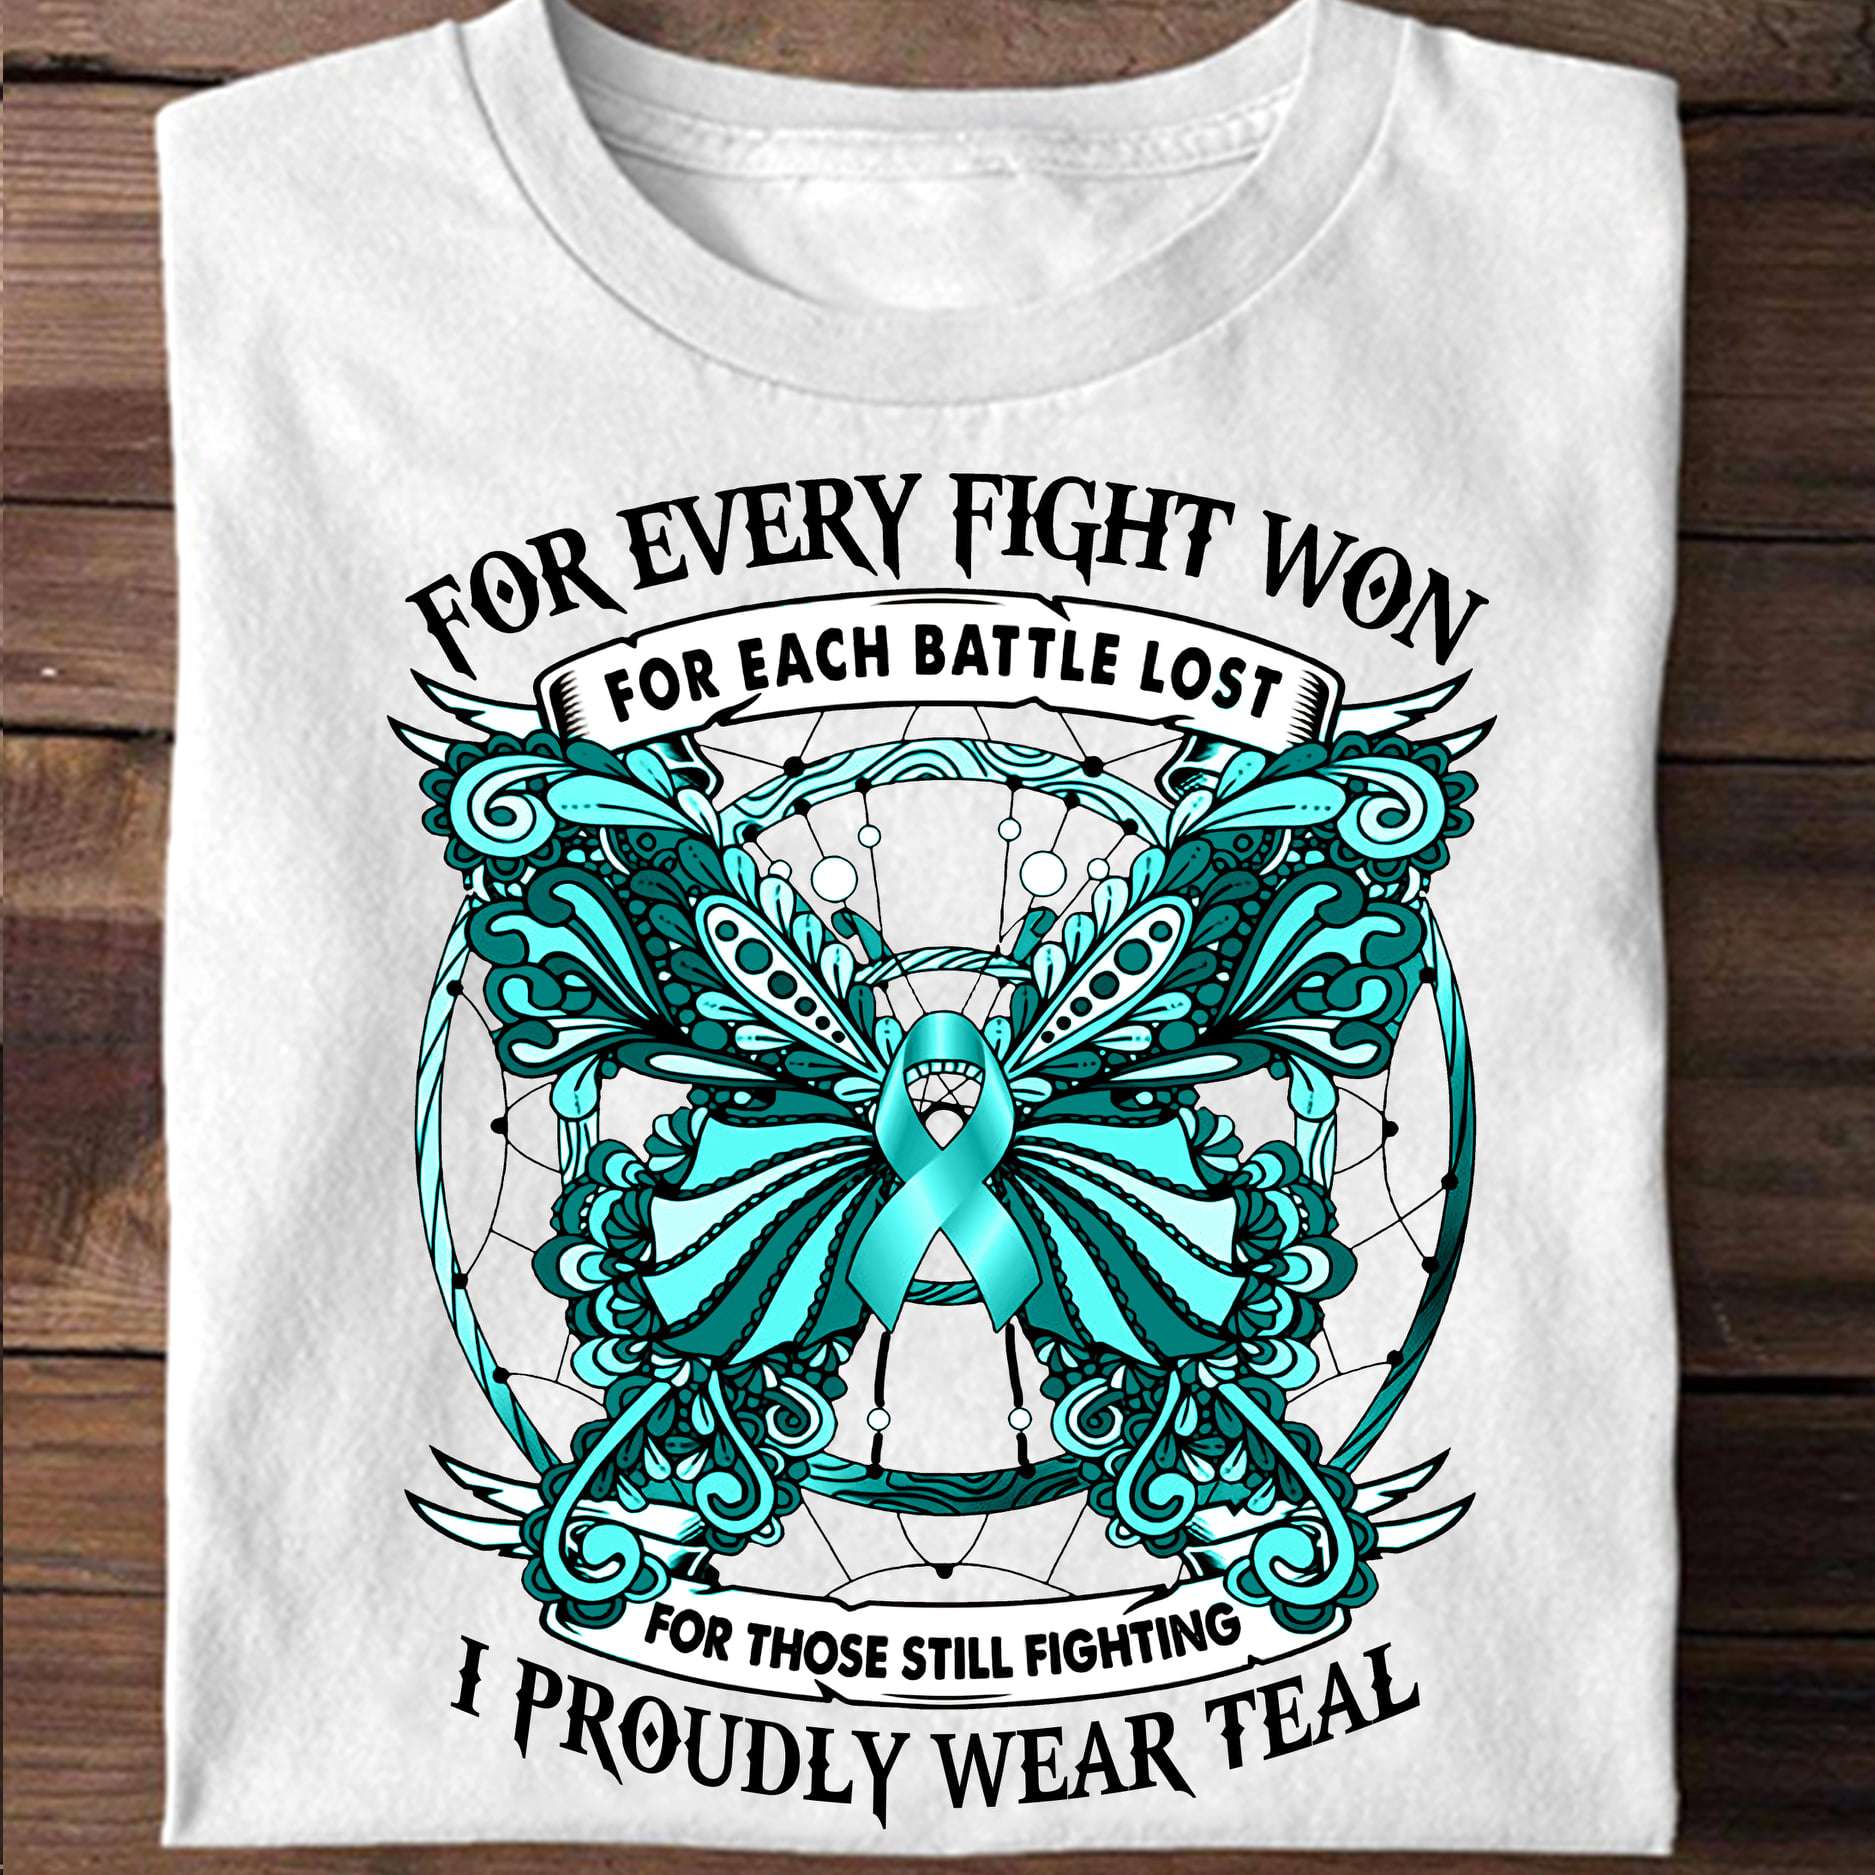 For every fight won for each battle lost for those still fighting I proudly wear teal - Fight for cancer awareness